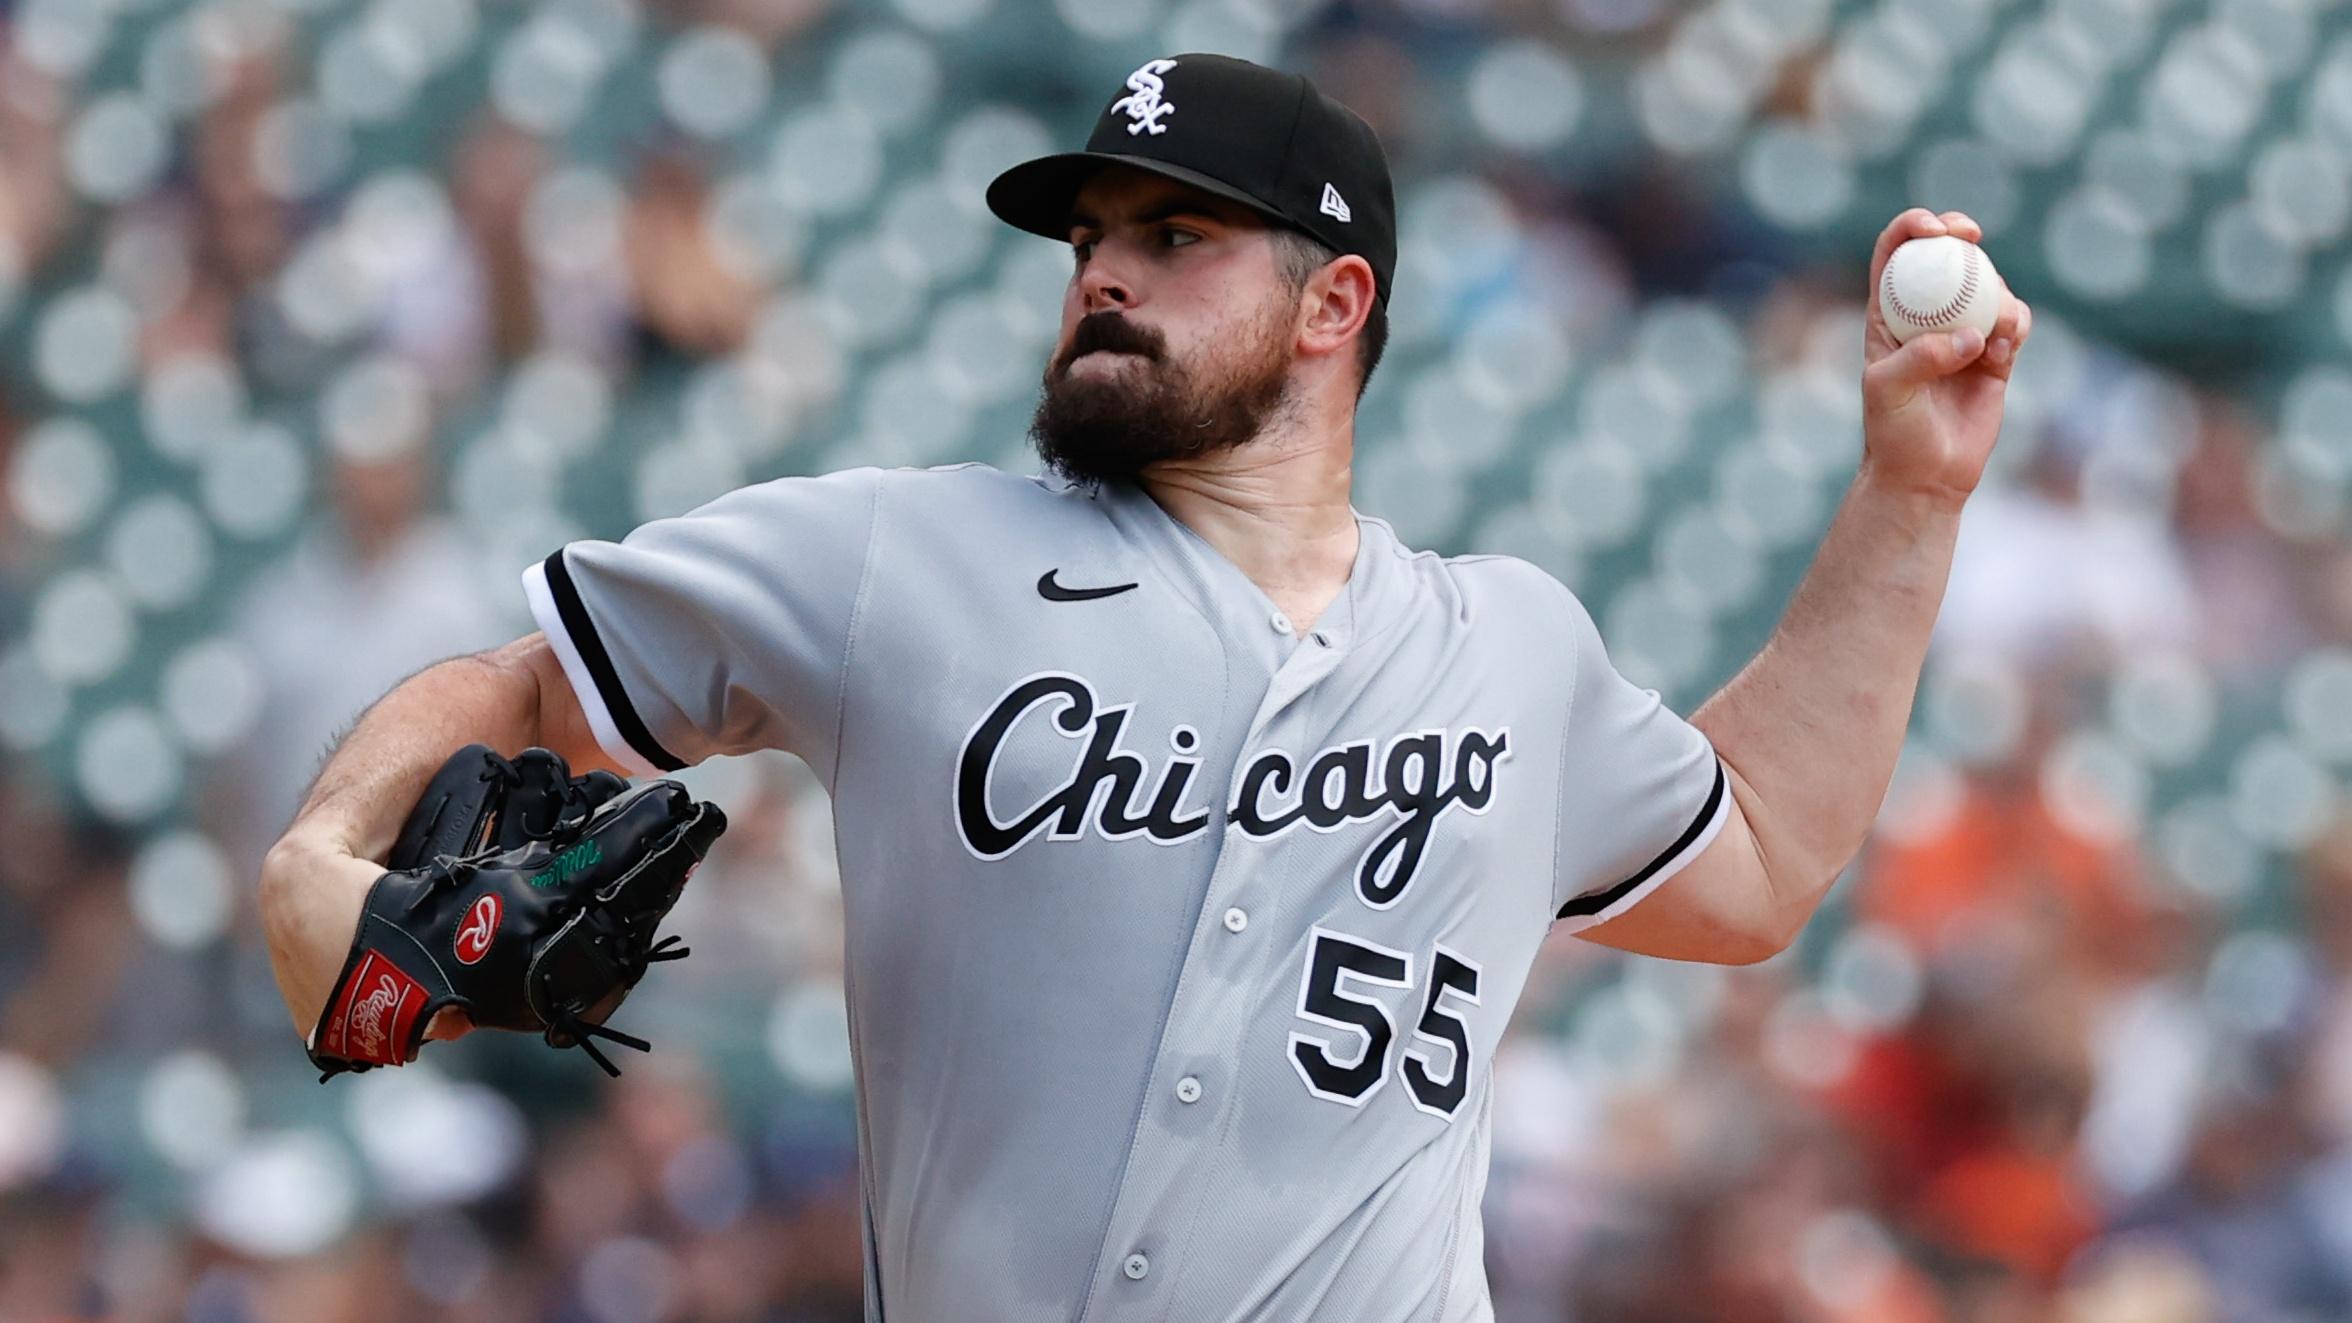 Jun 13, 2021; Detroit, Michigan, USA; Chicago White Sox starting pitcher Carlos Rodon (55) pitches in the third inning against the Detroit Tigers at Comerica Park. / © Rick Osentoski-USA TODAY Sports